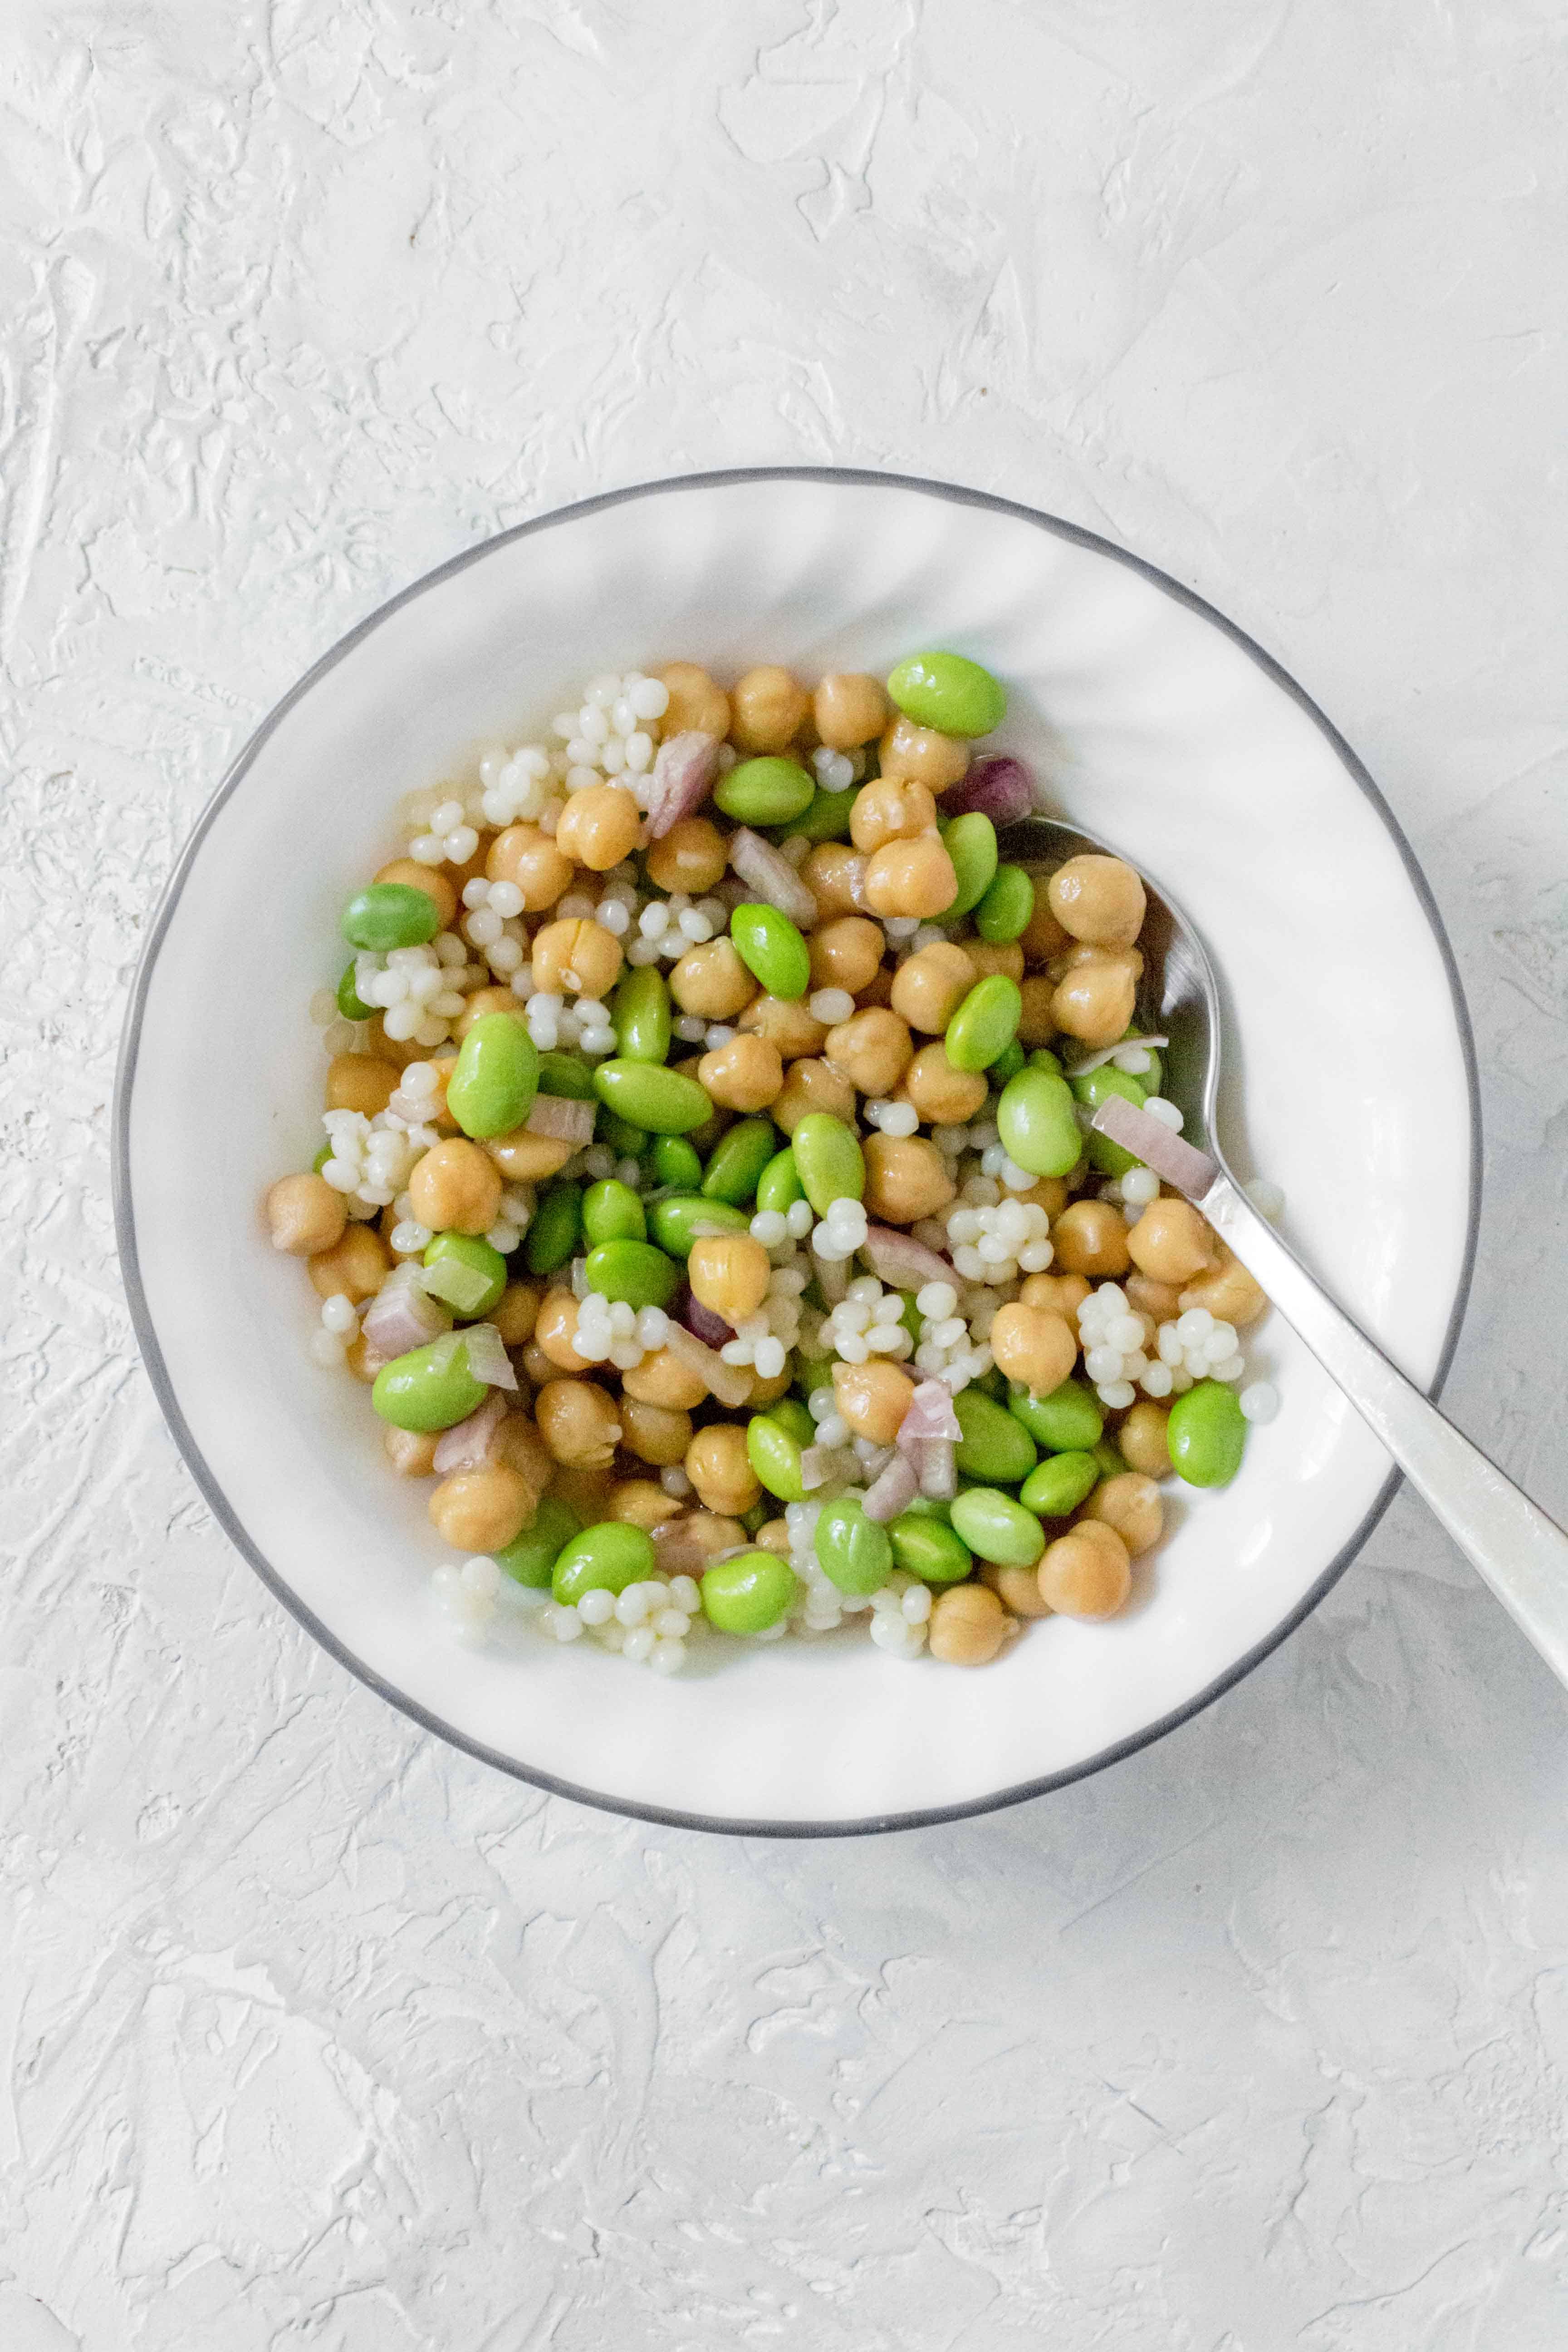 edamame, chickpeas, and couscous in dressing